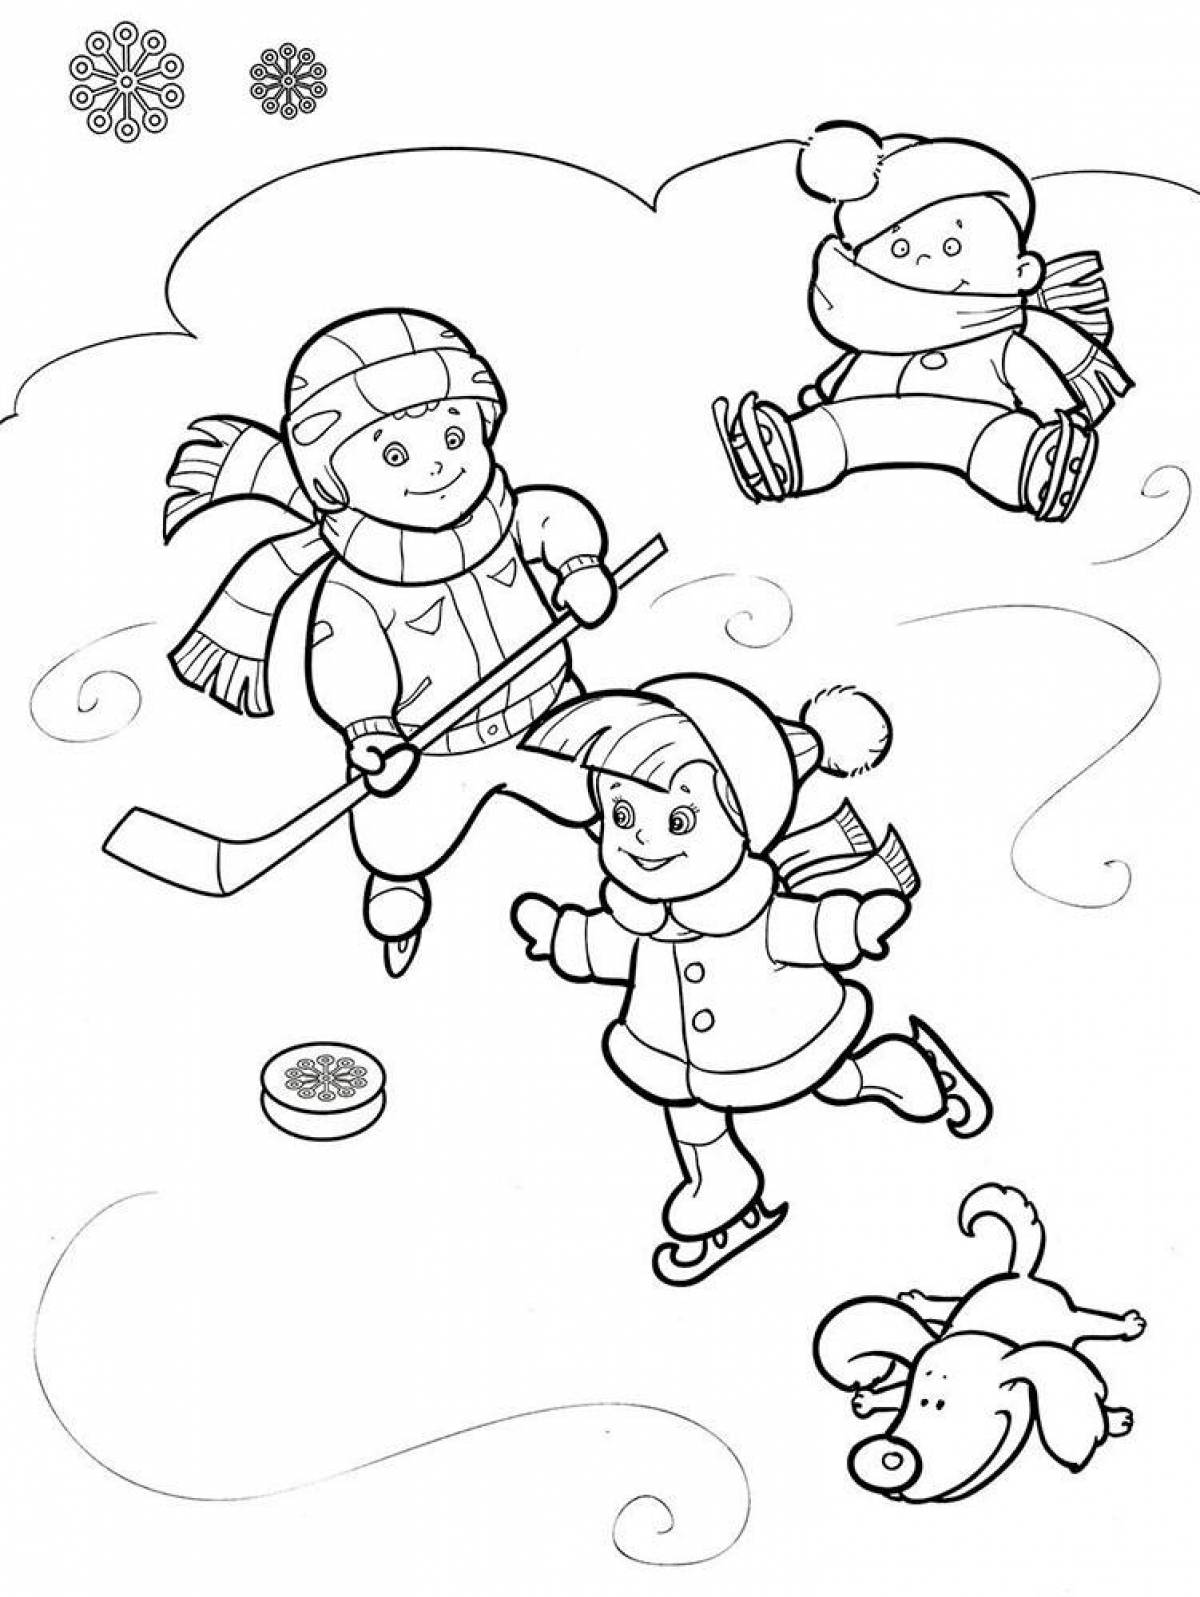 Live coloring winter sports for children 6-7 years old